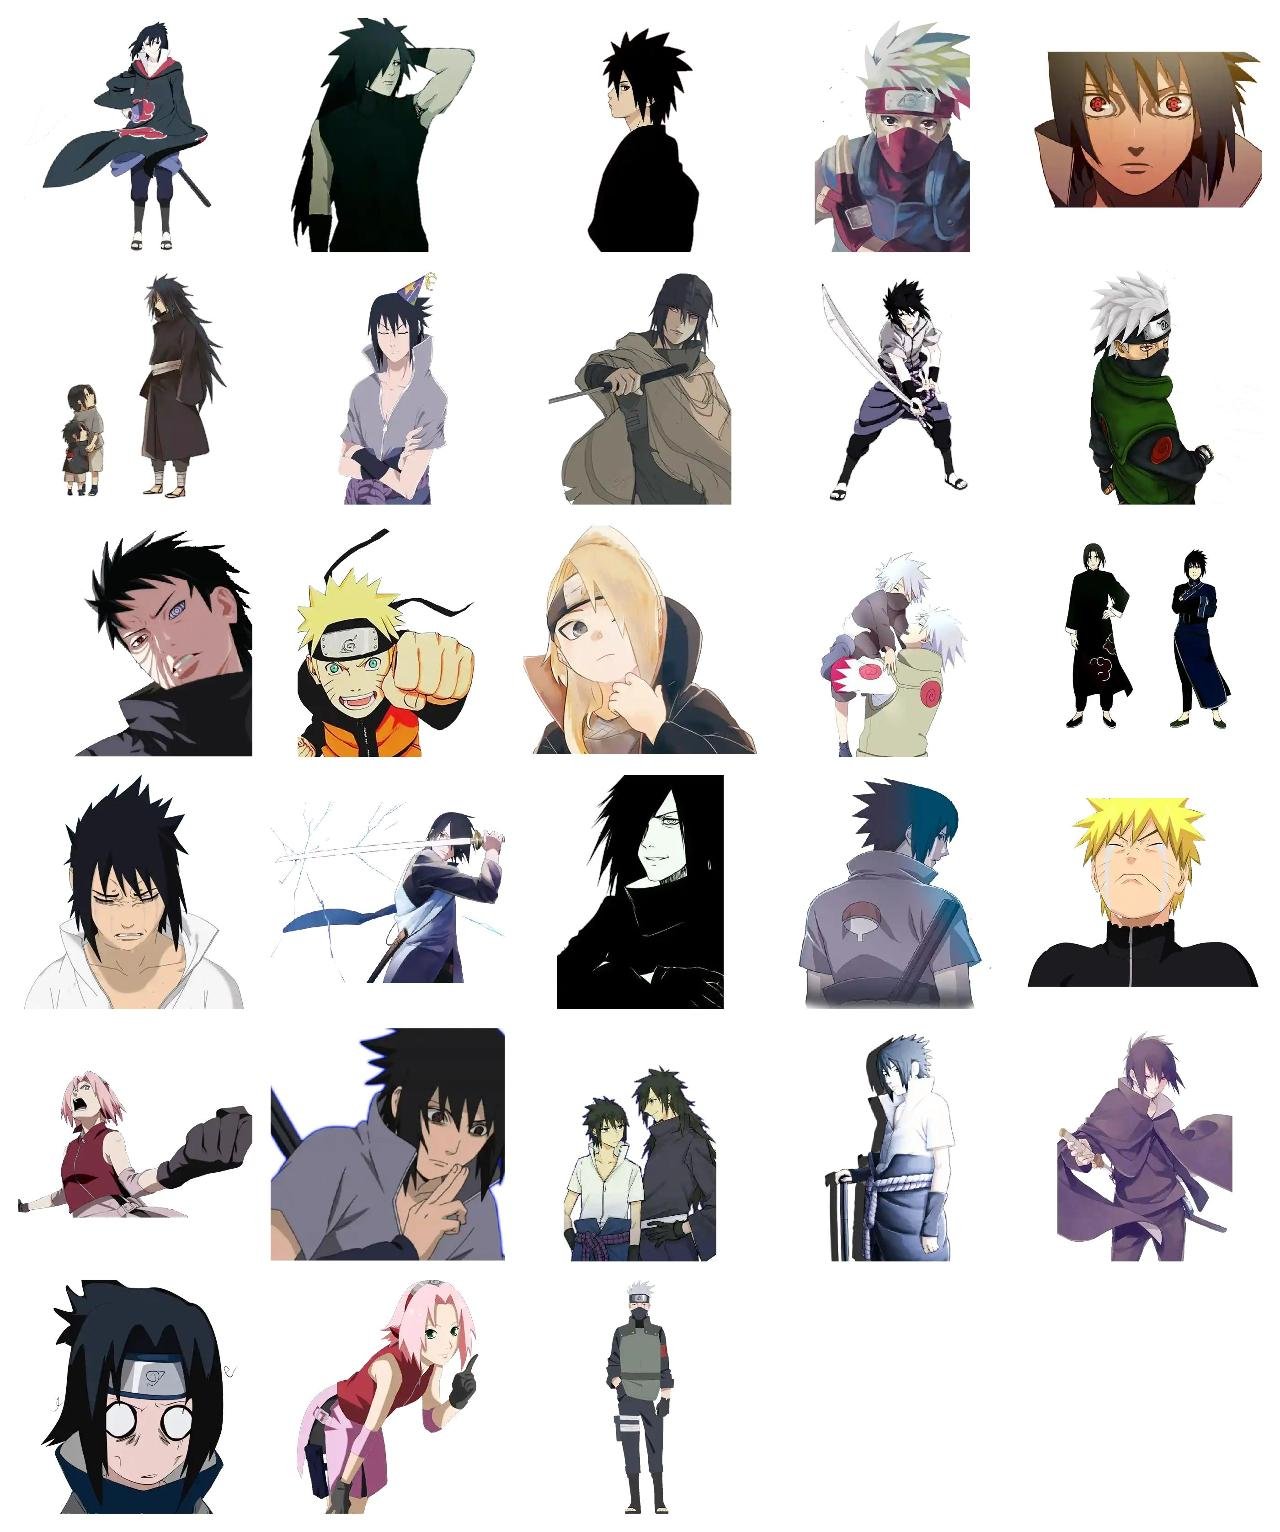 Naruto #33 Naruto sticker pack for Whatsapp, Telegram, Signal, and others chatting and message apps